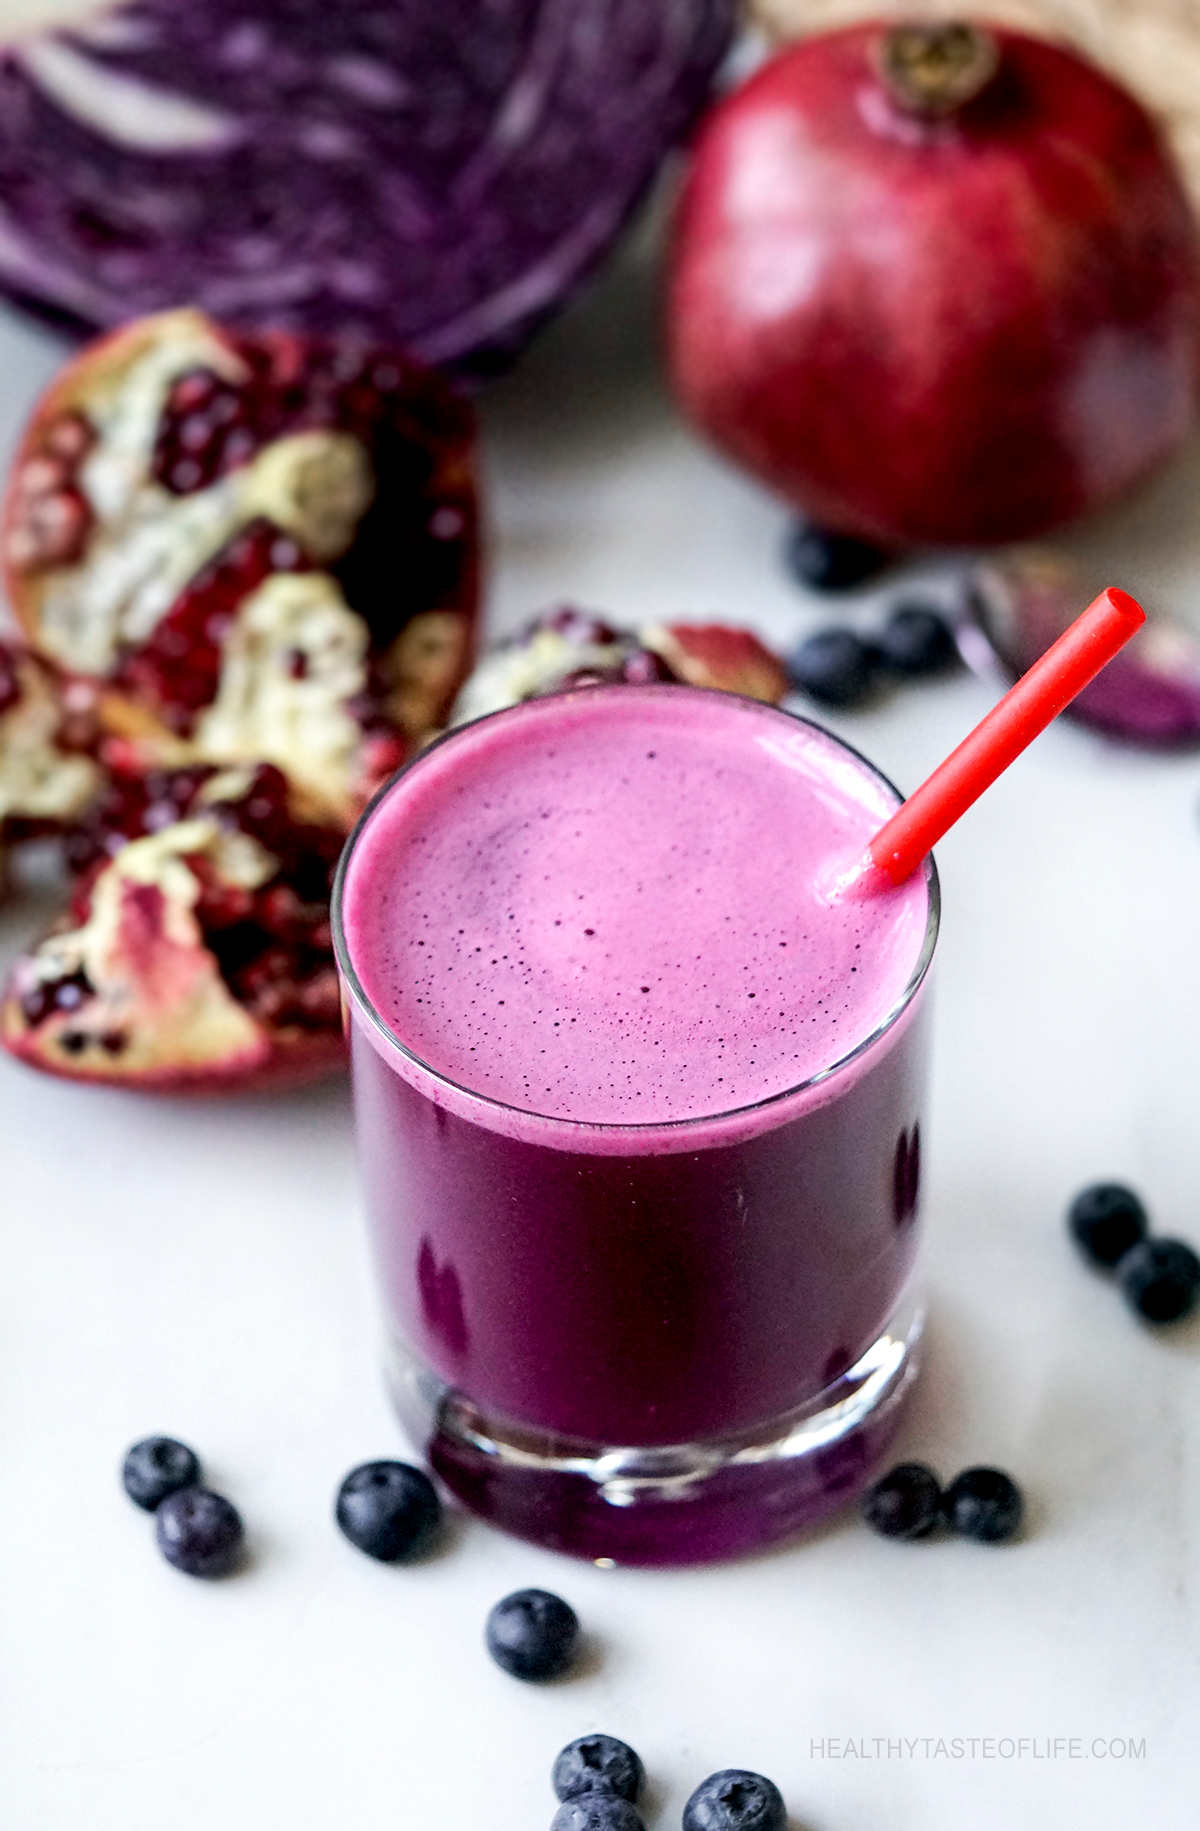 Cancer killer juice made with pomegranate, red cabbage and blueberries served in a glass.